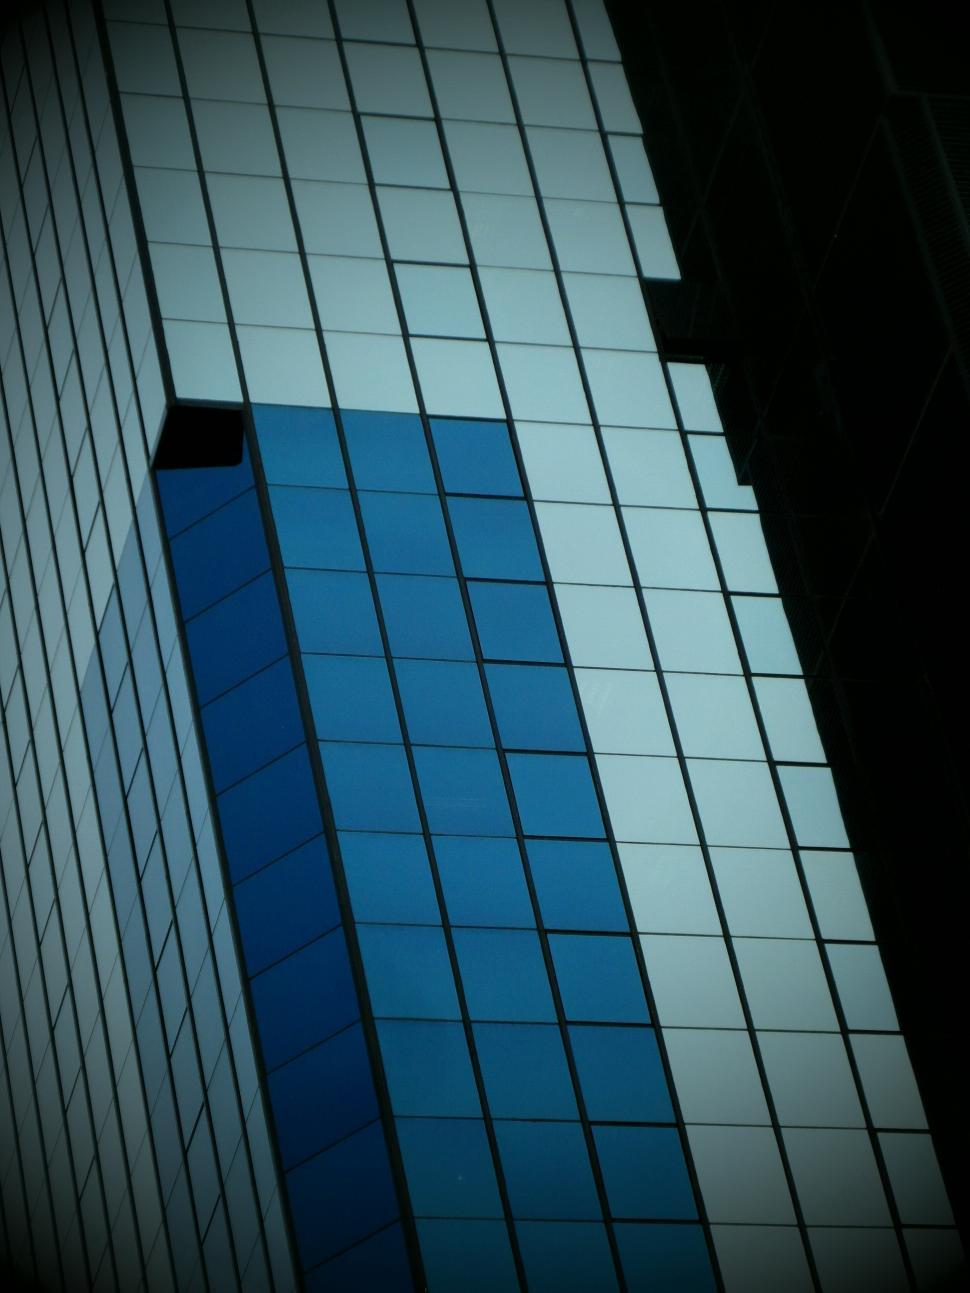 Free Image of Office Windows Reflections 